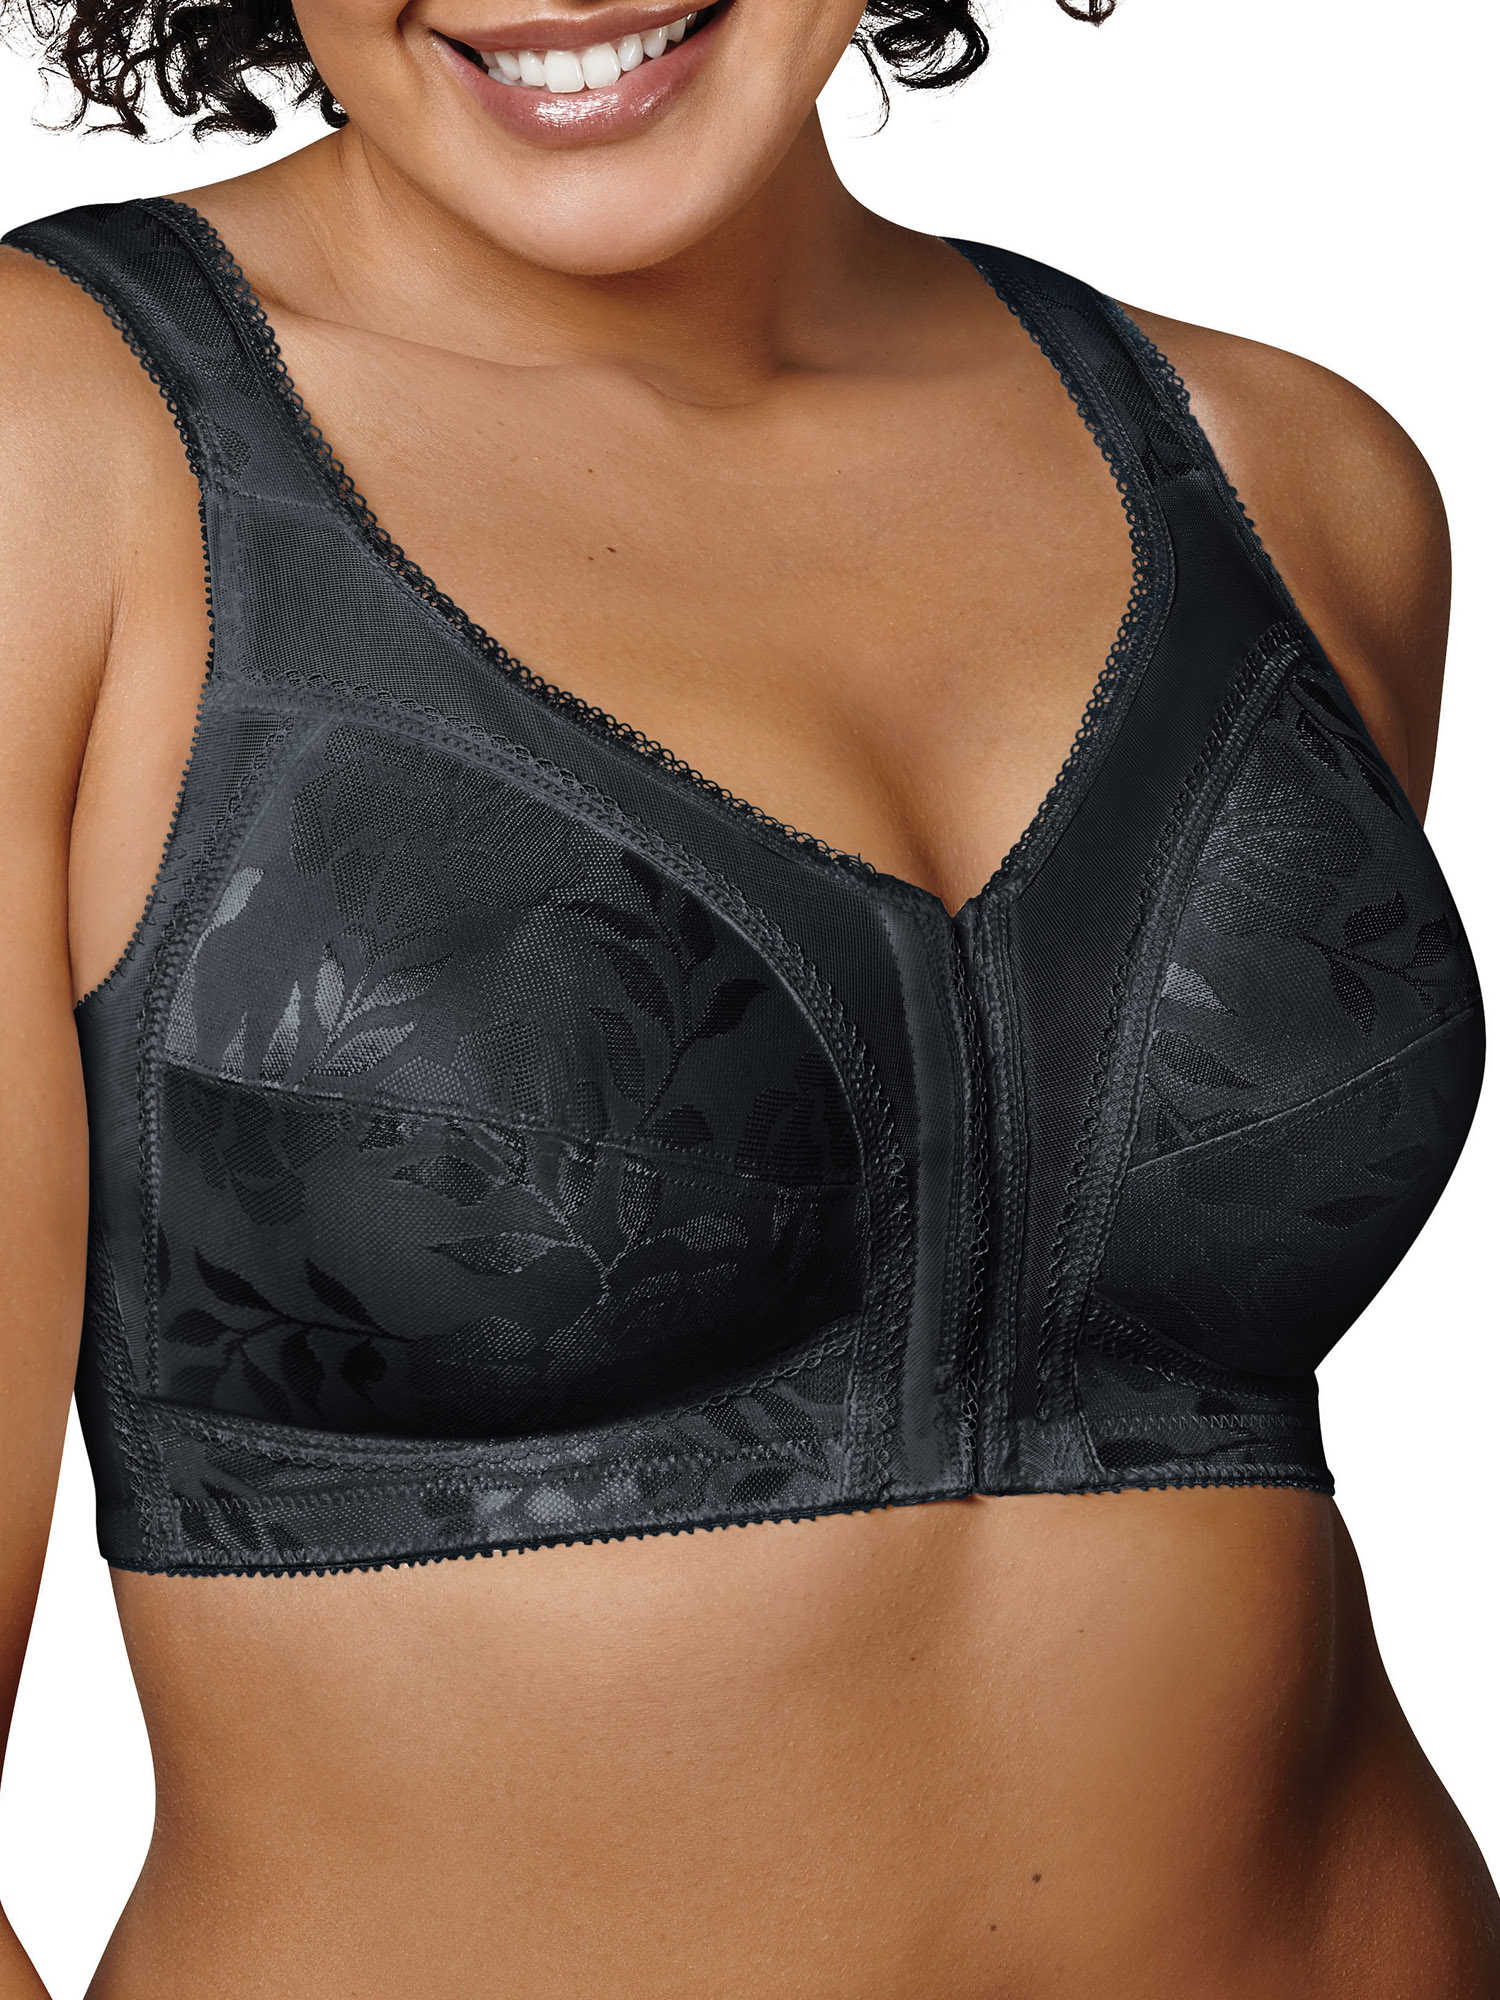 Playtex Womens 18 Hour Front-Close Wire-Free Bra Style-4695 - image 1 of 5